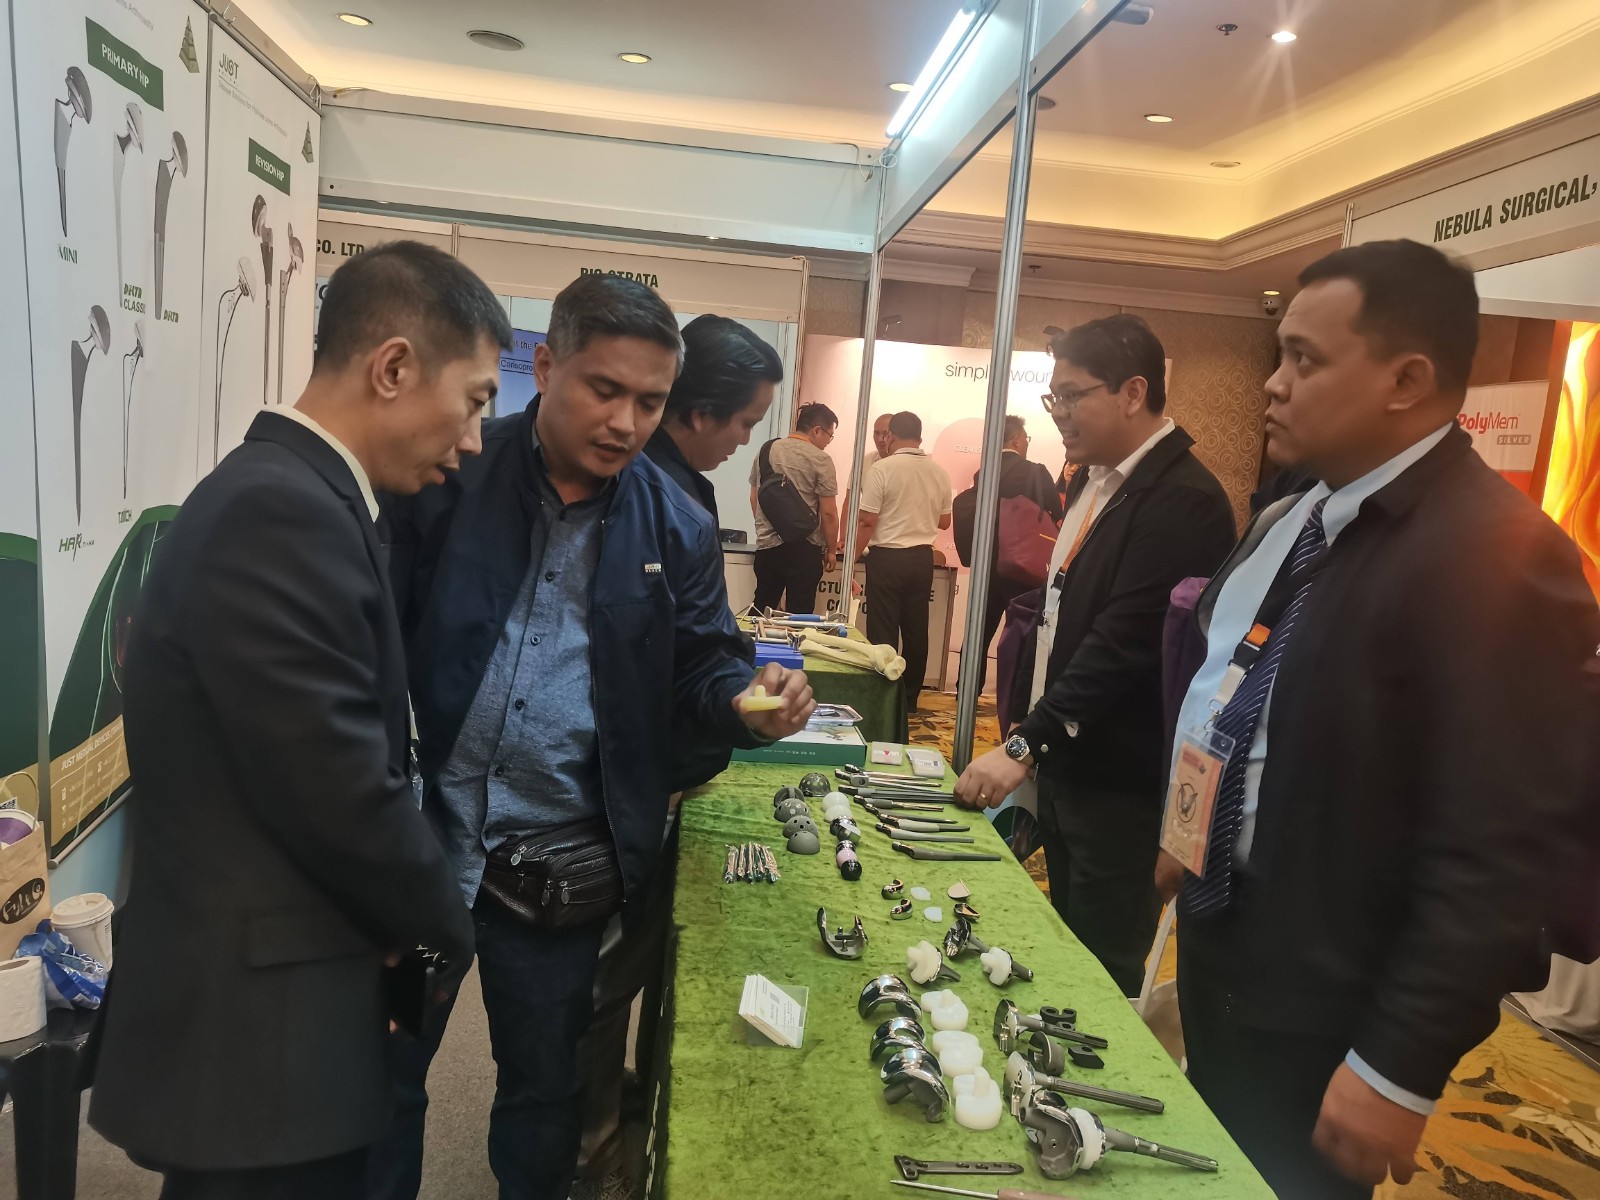 JUST MEDICAL, China's leading orthopedic implant manufacturer, is thrilled to exhibit its cutting-edge solutions at the Philippine Orthopaedic Association 74th Congress in Manila from November 15th to 18th, 2023.